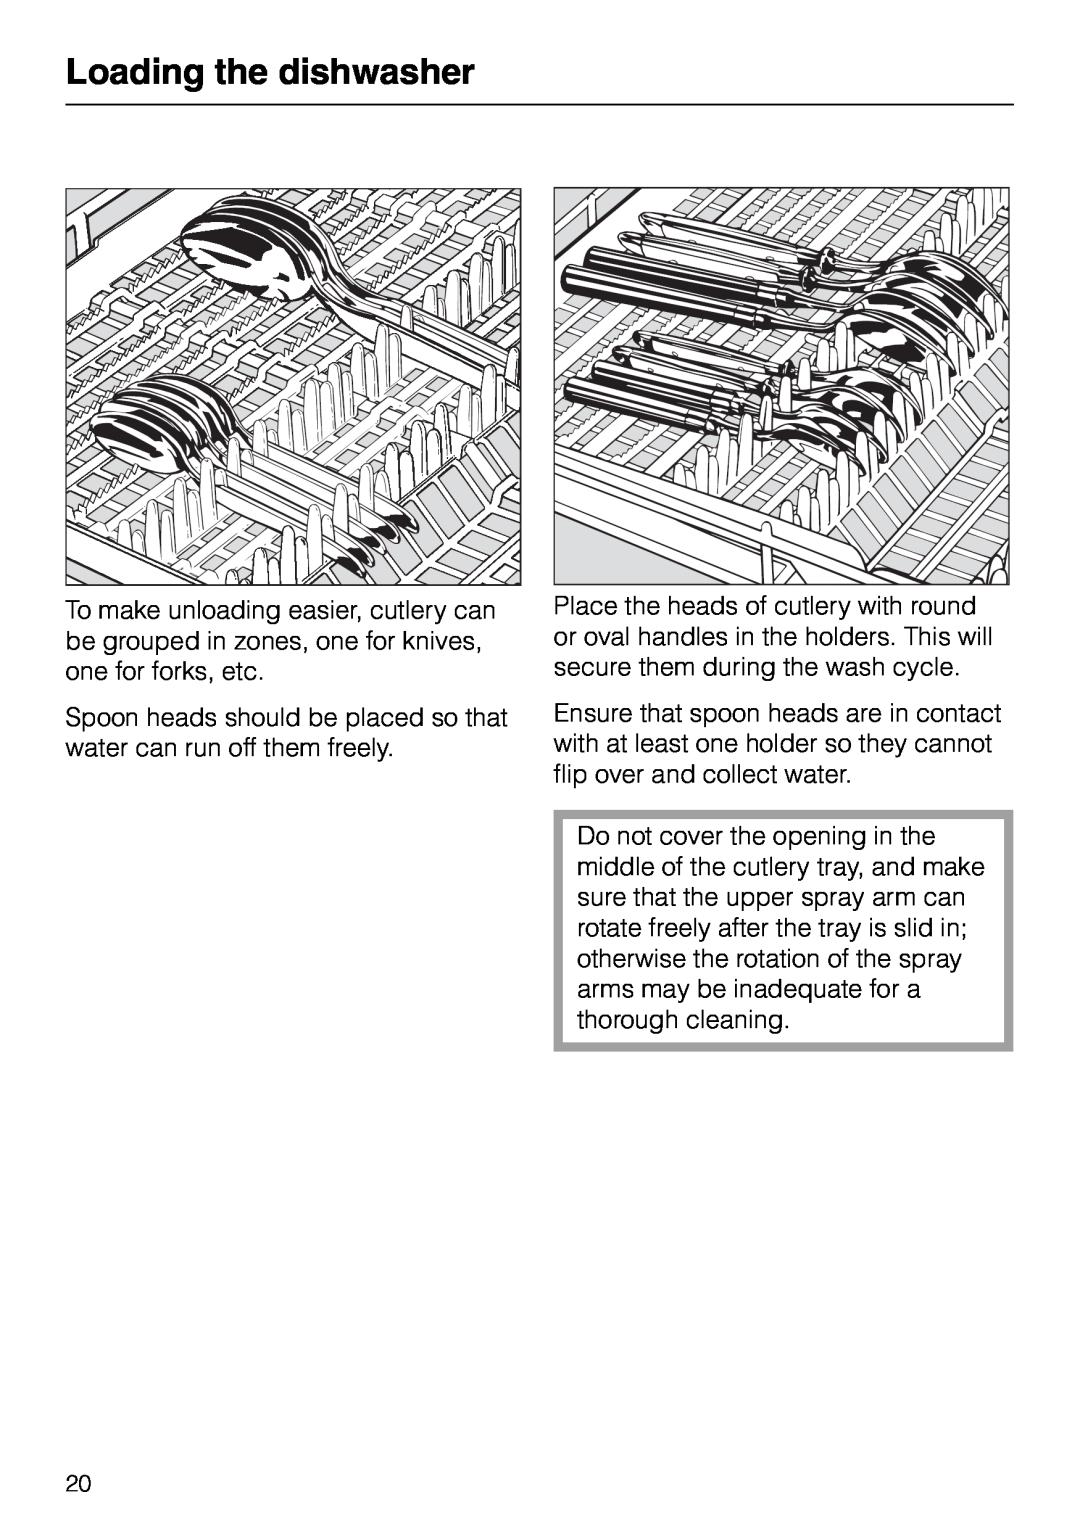 Miele M.-NR. 04 390 922 operating instructions Loading the dishwasher 